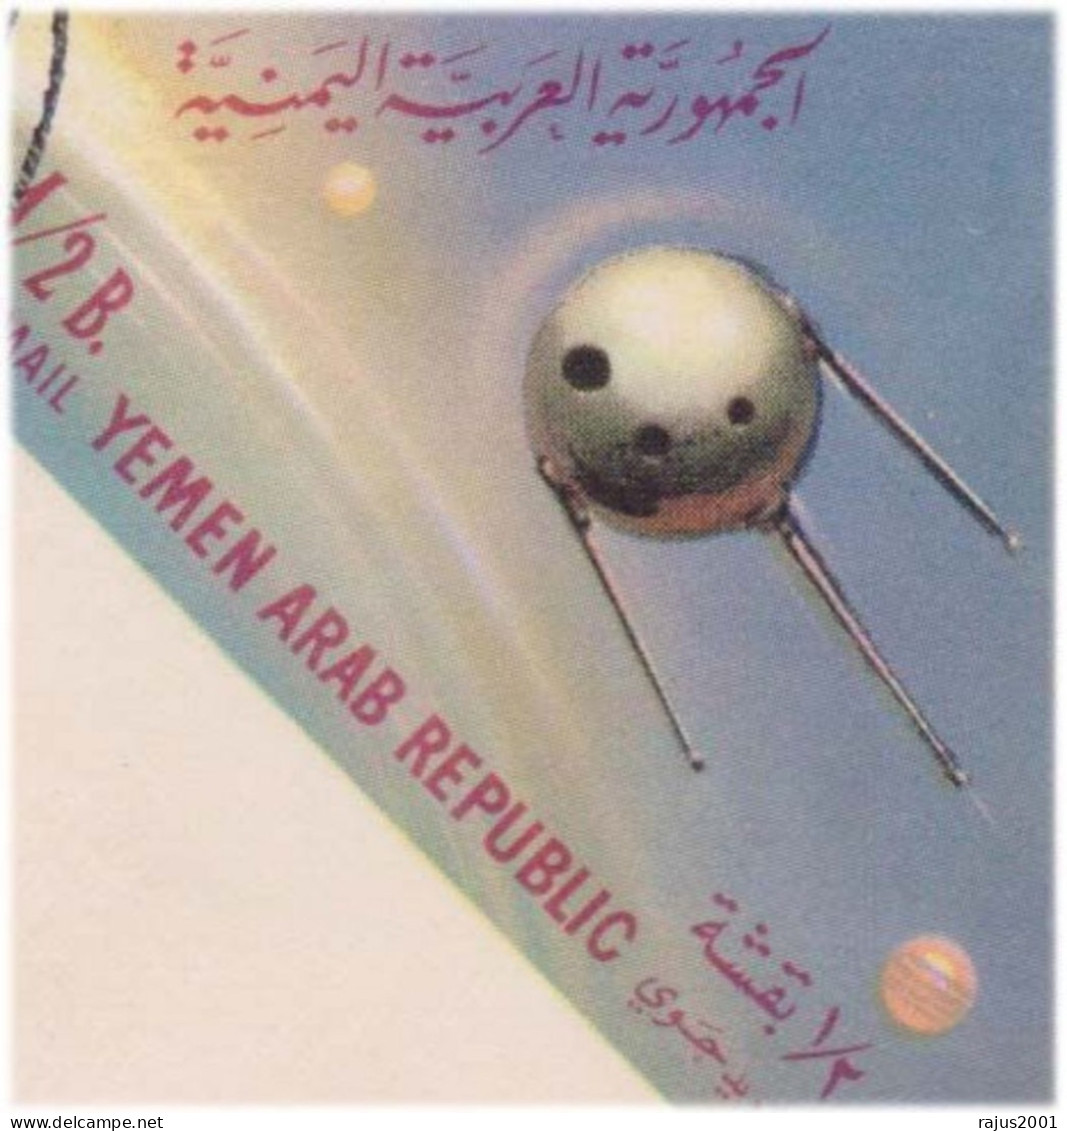 Honouring Astronauts, Exploration, SPUTNIK World First Man Made Space Satellite, Science, Astronomy IMPERF YEMEN FDC - Astronomùia